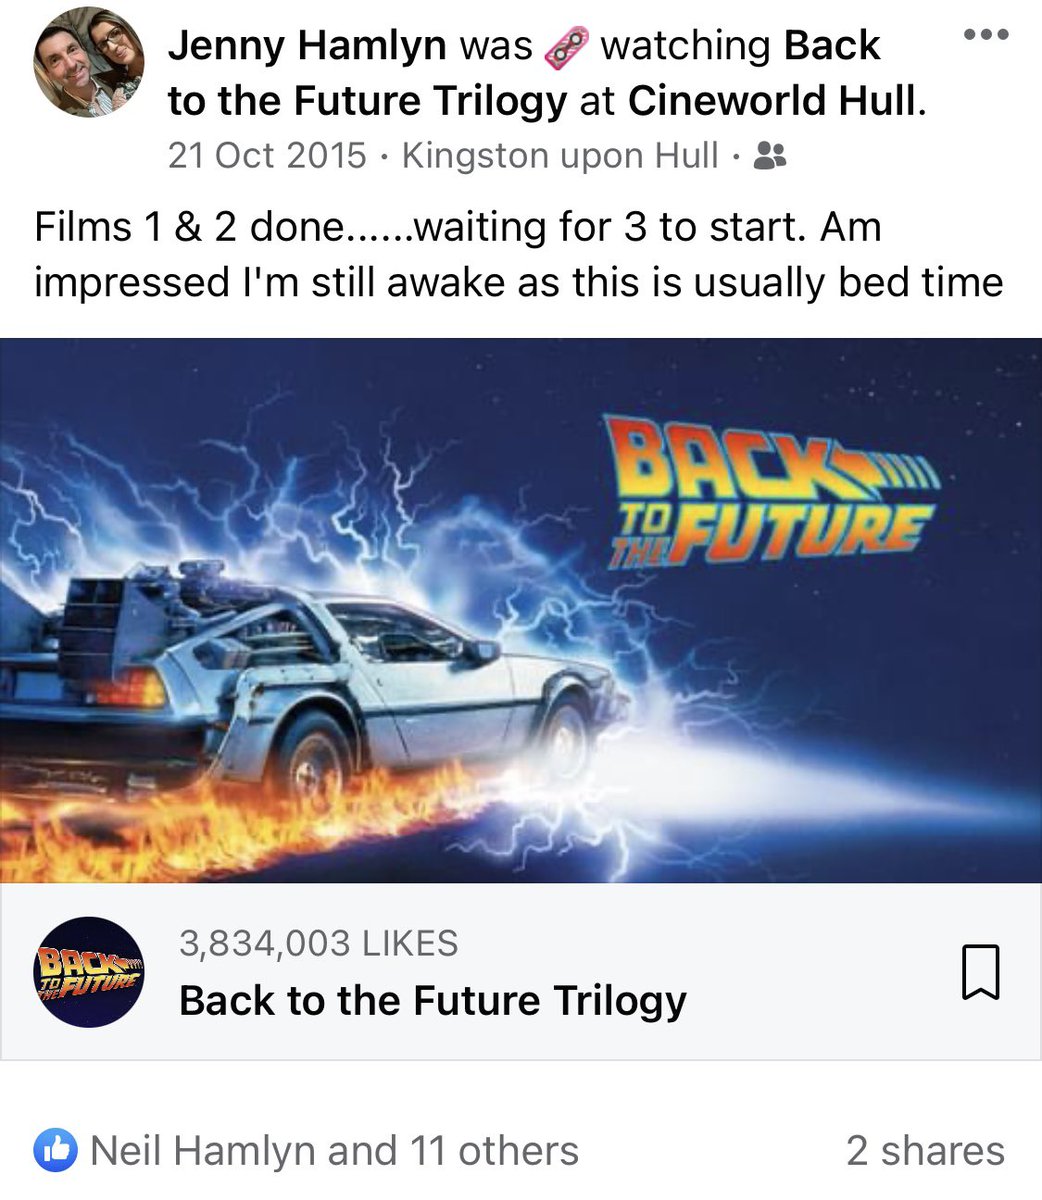 One of the best things we did on the original Back to the Future Day was to go and watch all three movies back to back at the cinema. A memory I will never forget 🥰